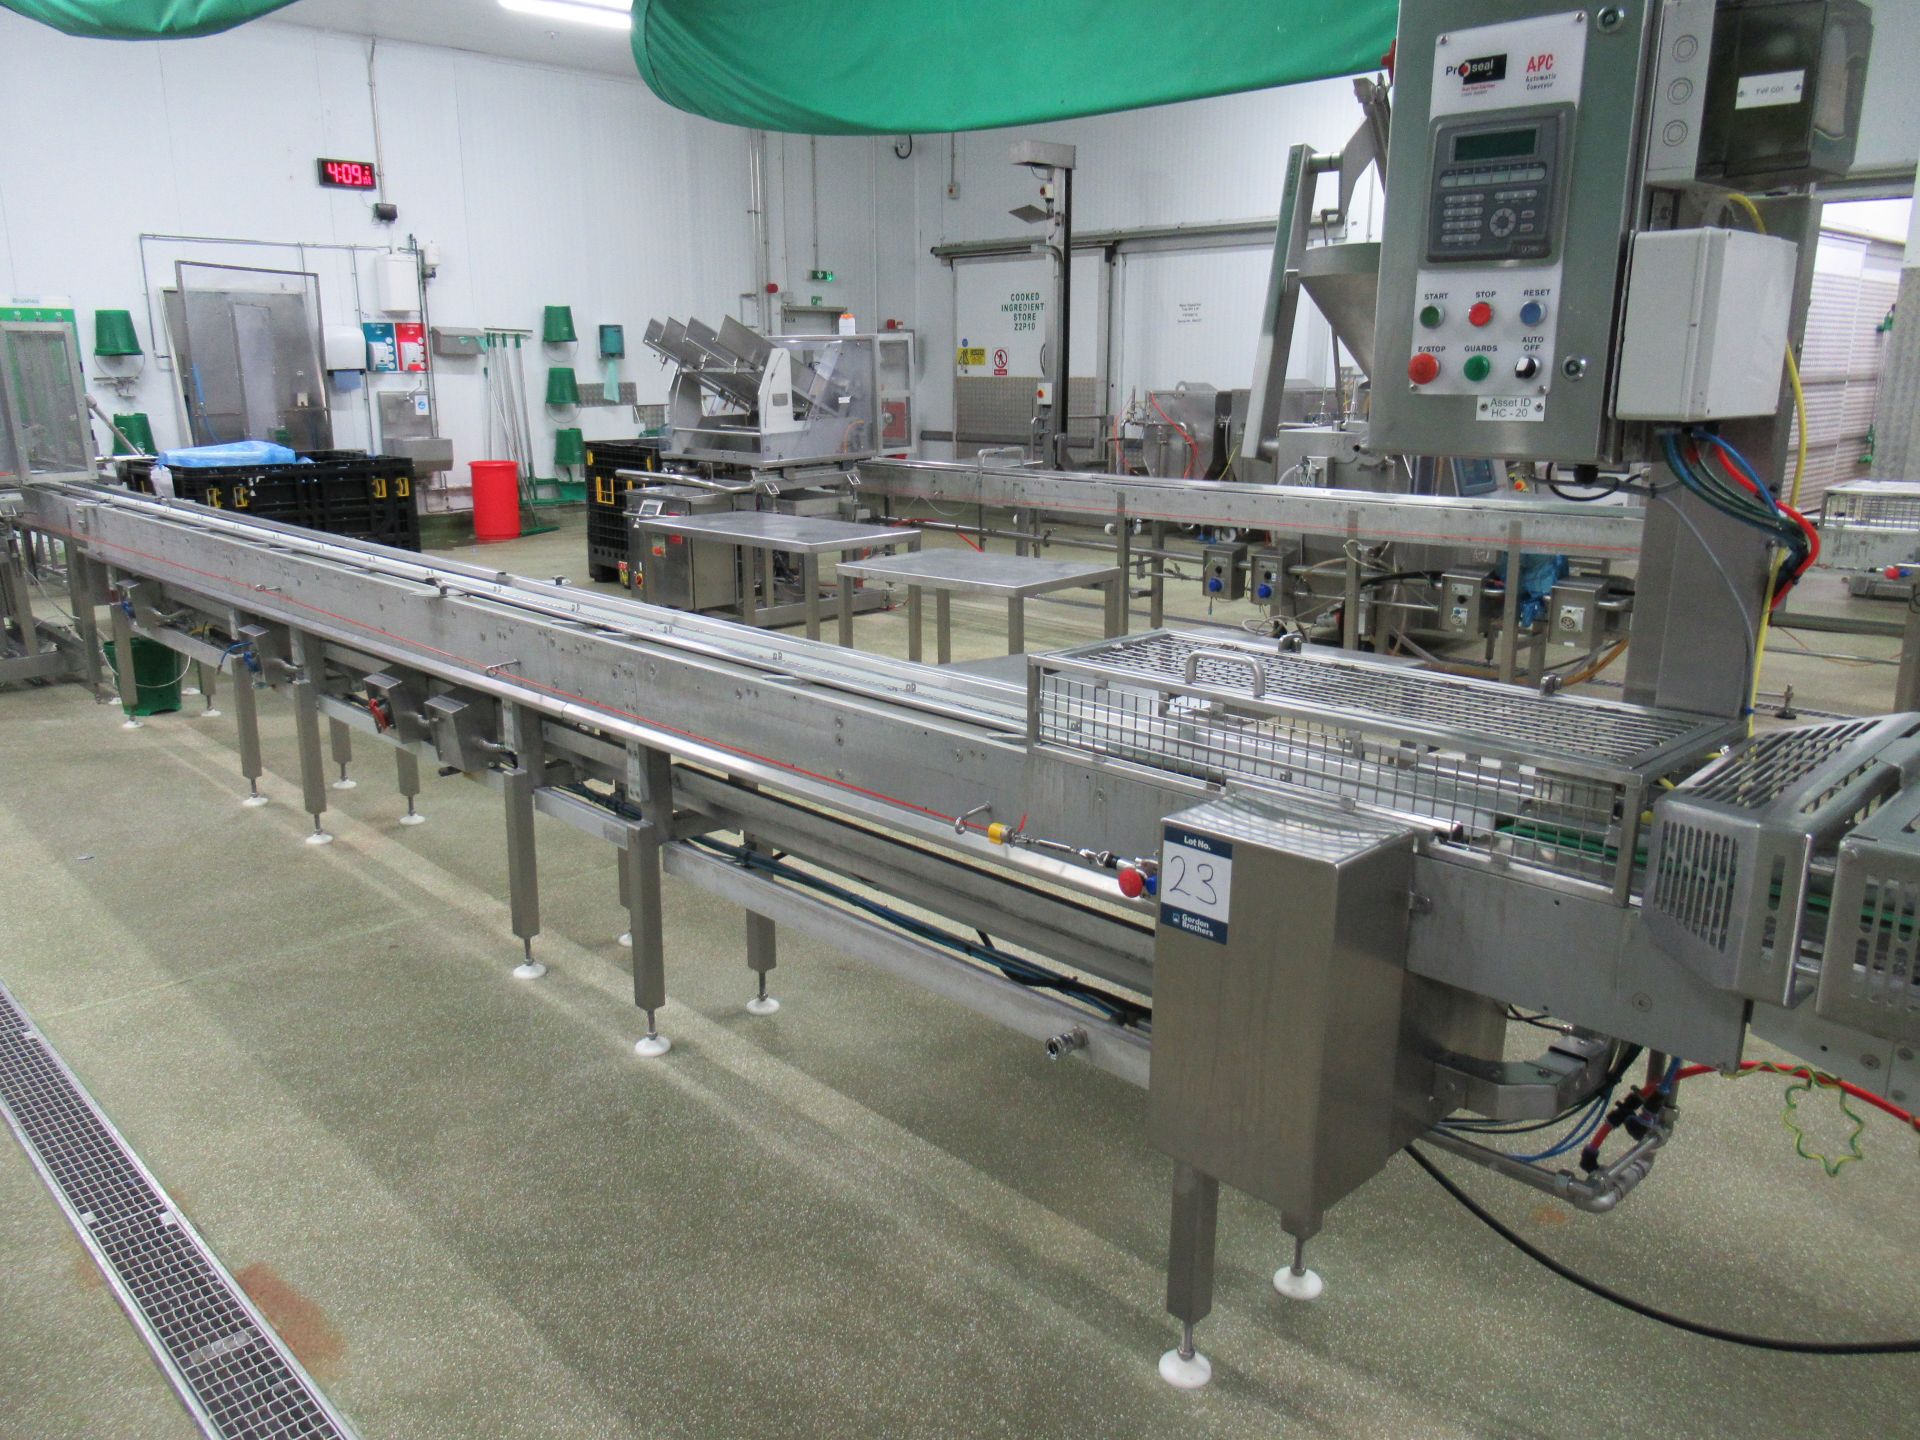 Proseal APC chain conveyor, Serial no: 1200, approximately 8m long, with adjustable tray width fence